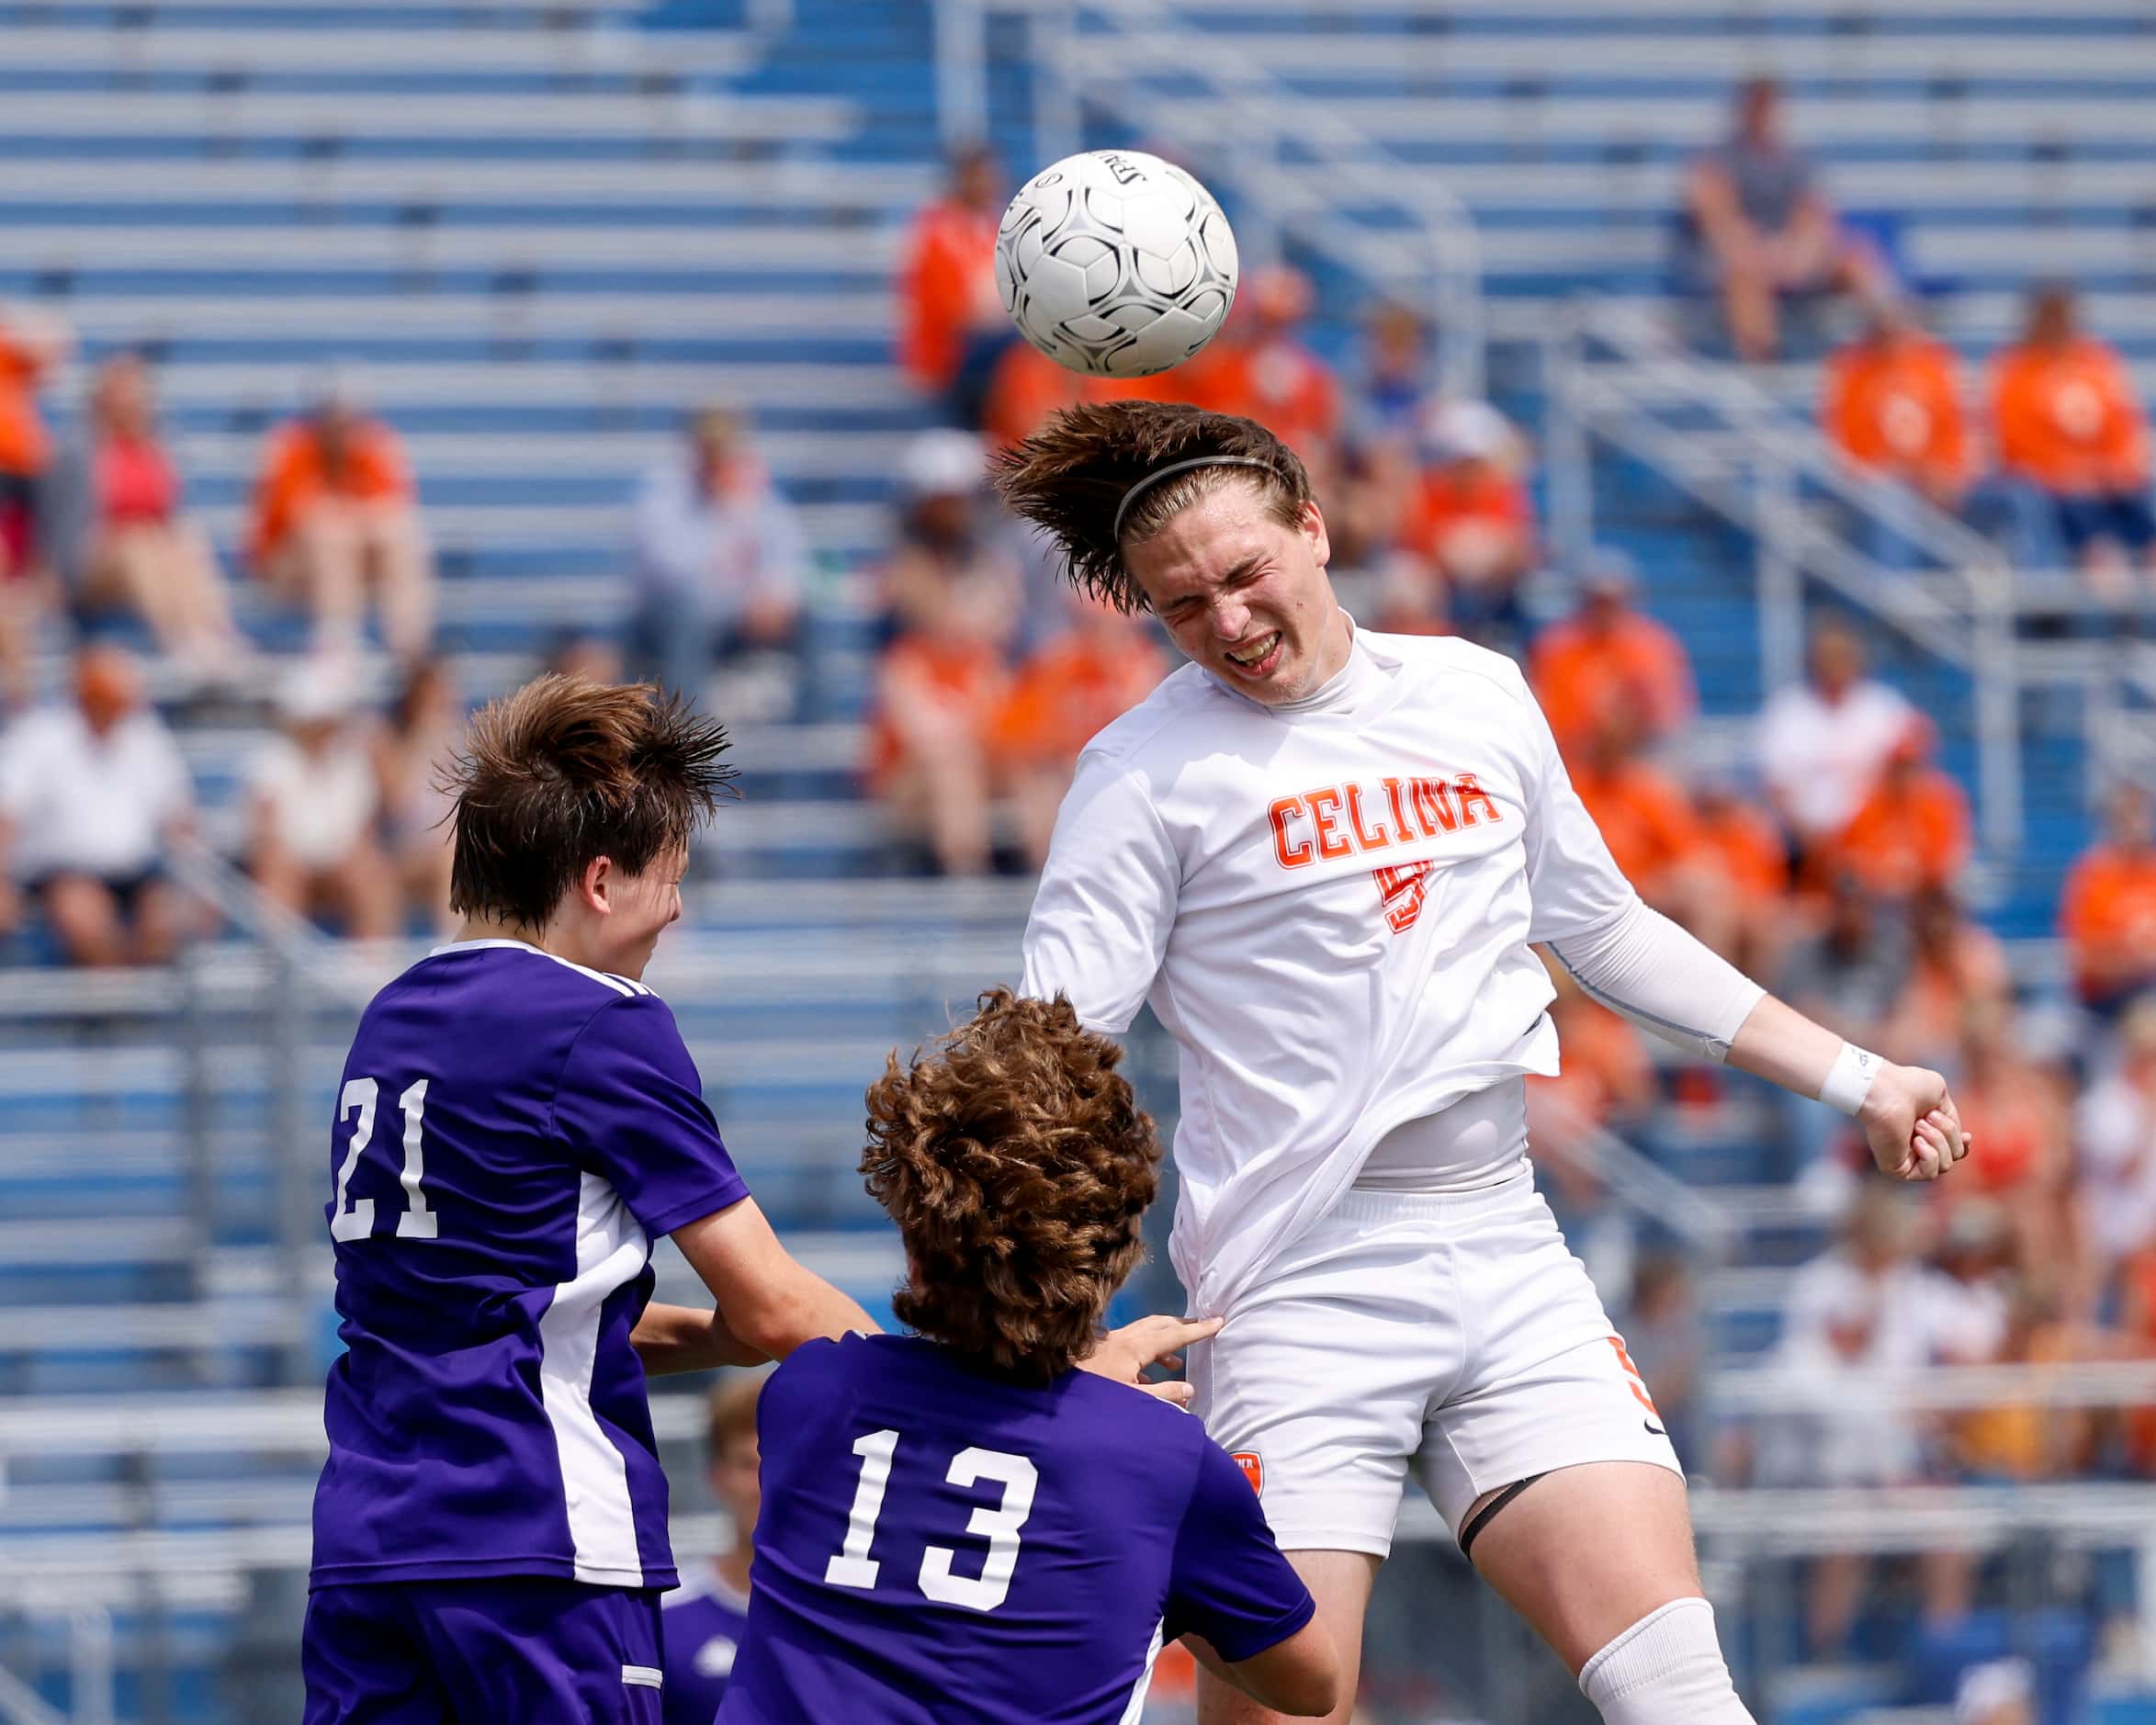 Celina forward Seth Brown (5) heads the ball over Boerne’s Logan Walter (13) and Boerne...